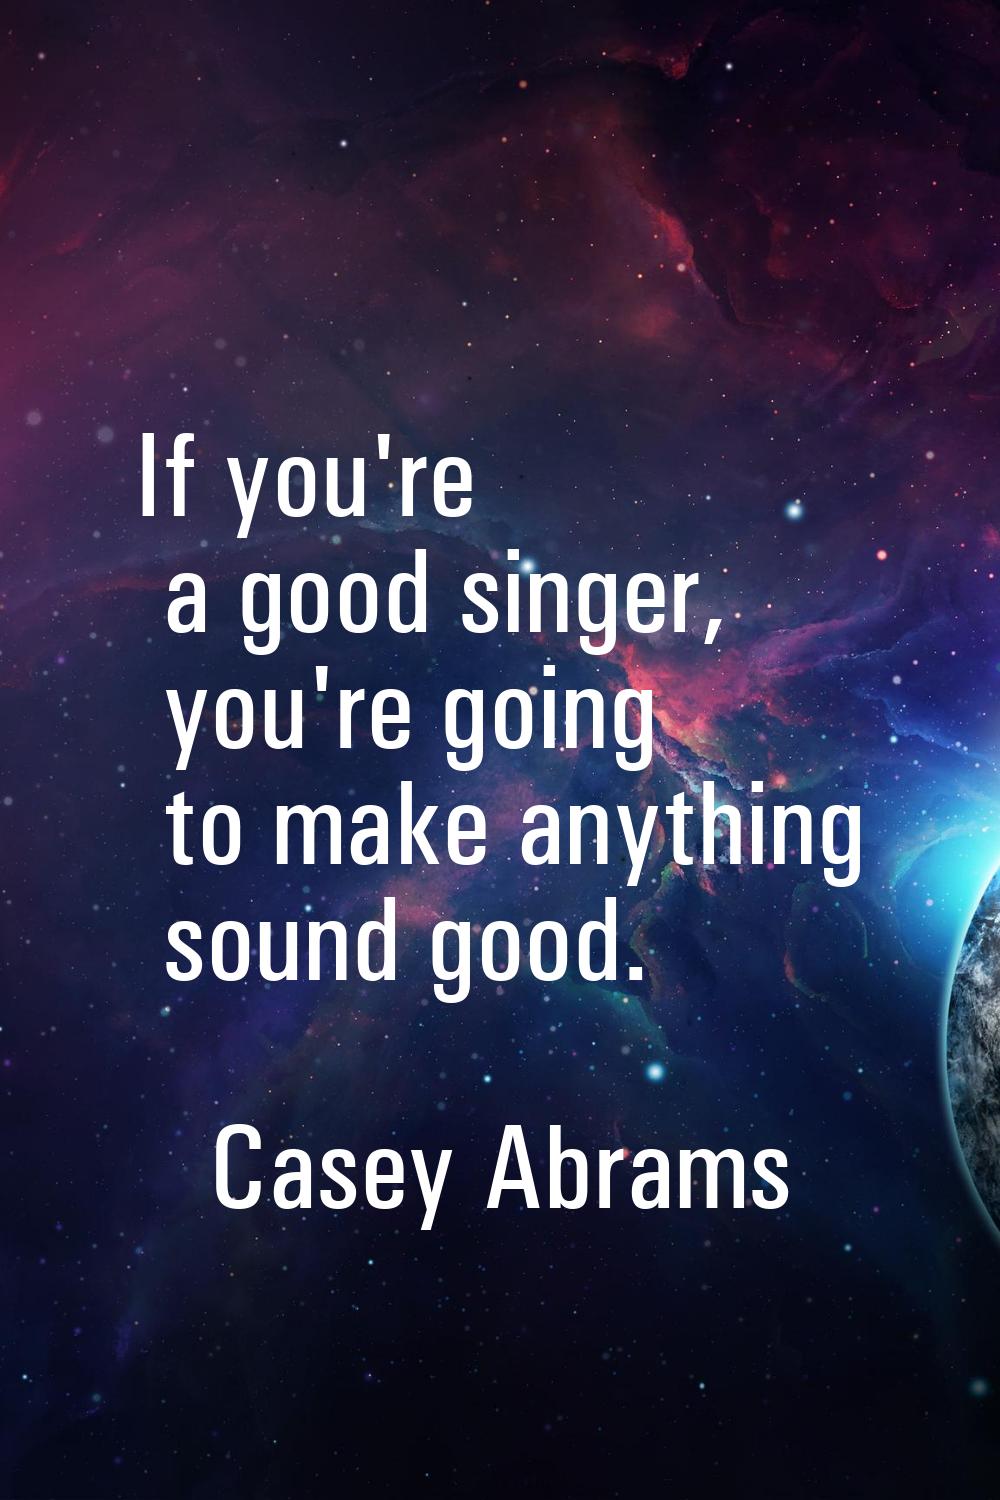 If you're a good singer, you're going to make anything sound good.